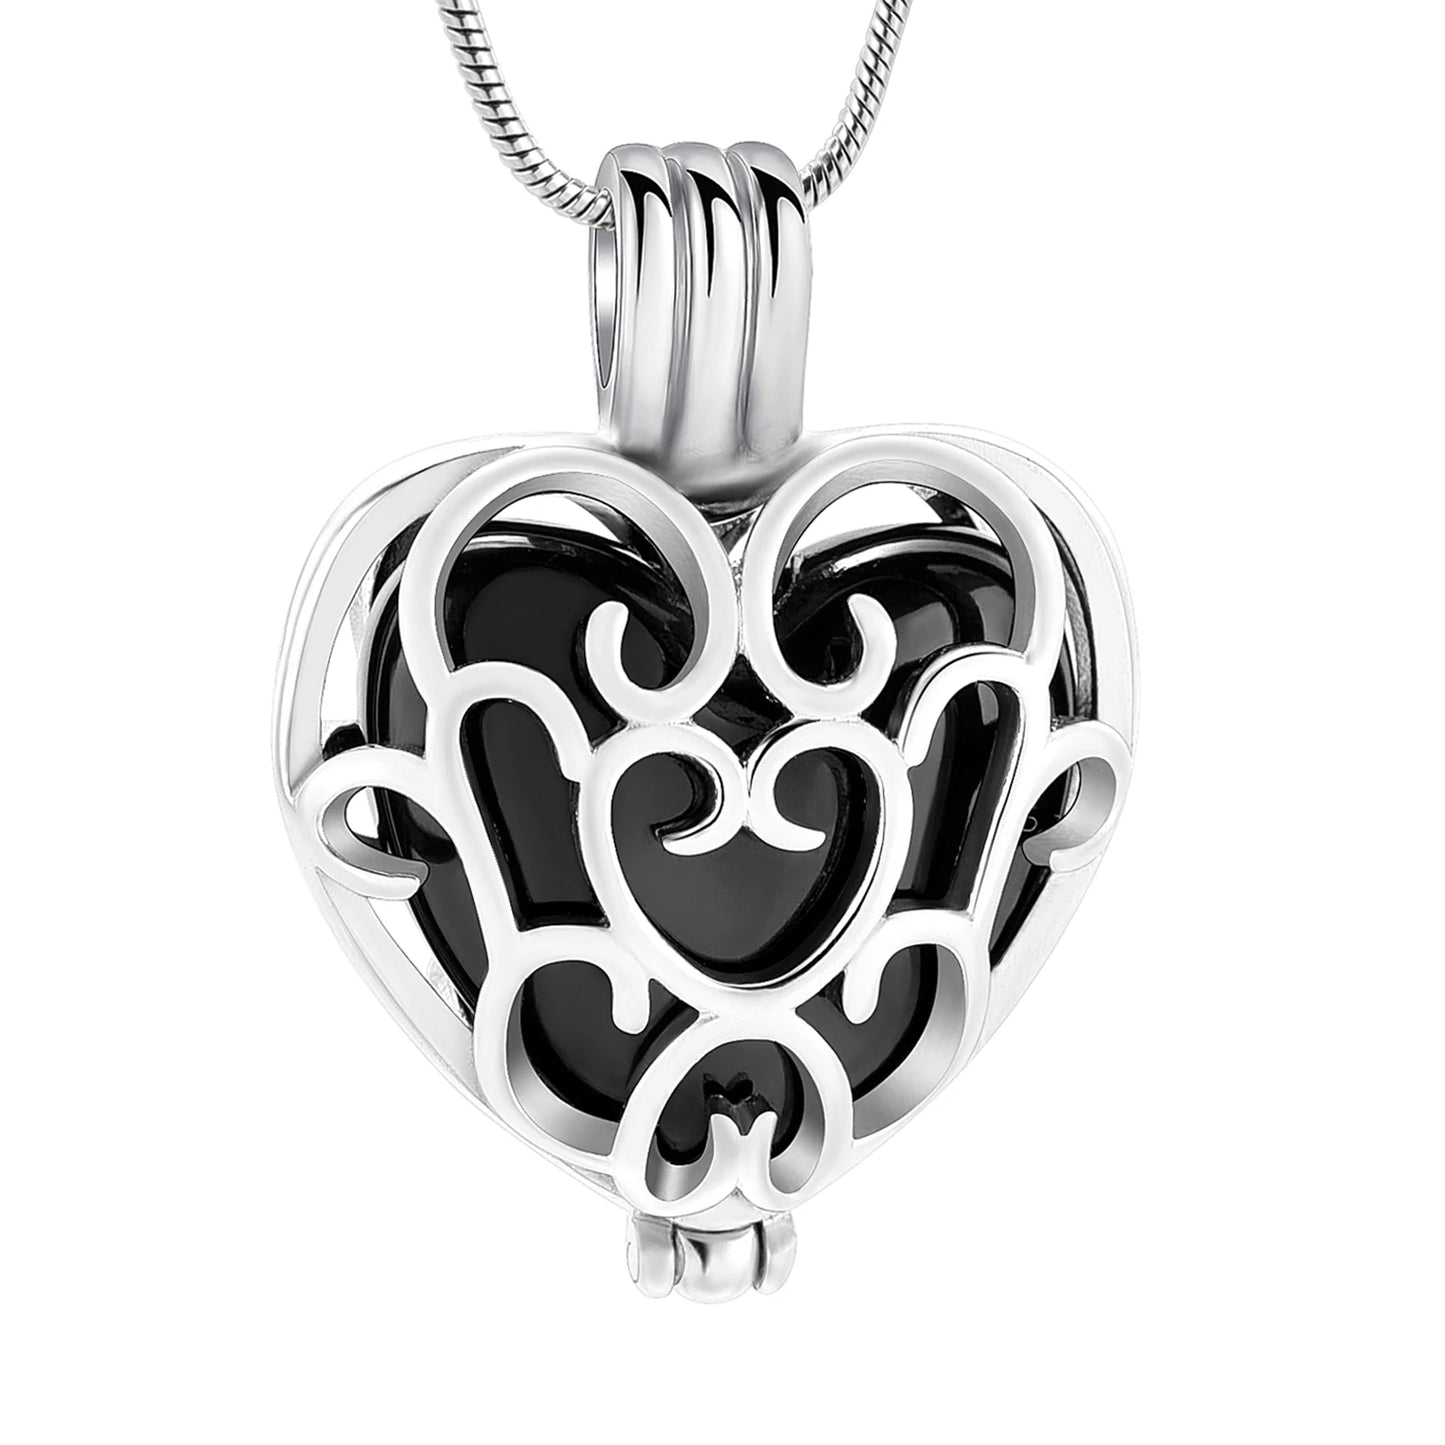 Inside Mini Heart Urn  Cremation Jewelry For Ashes Keepsake Pendant Necklace